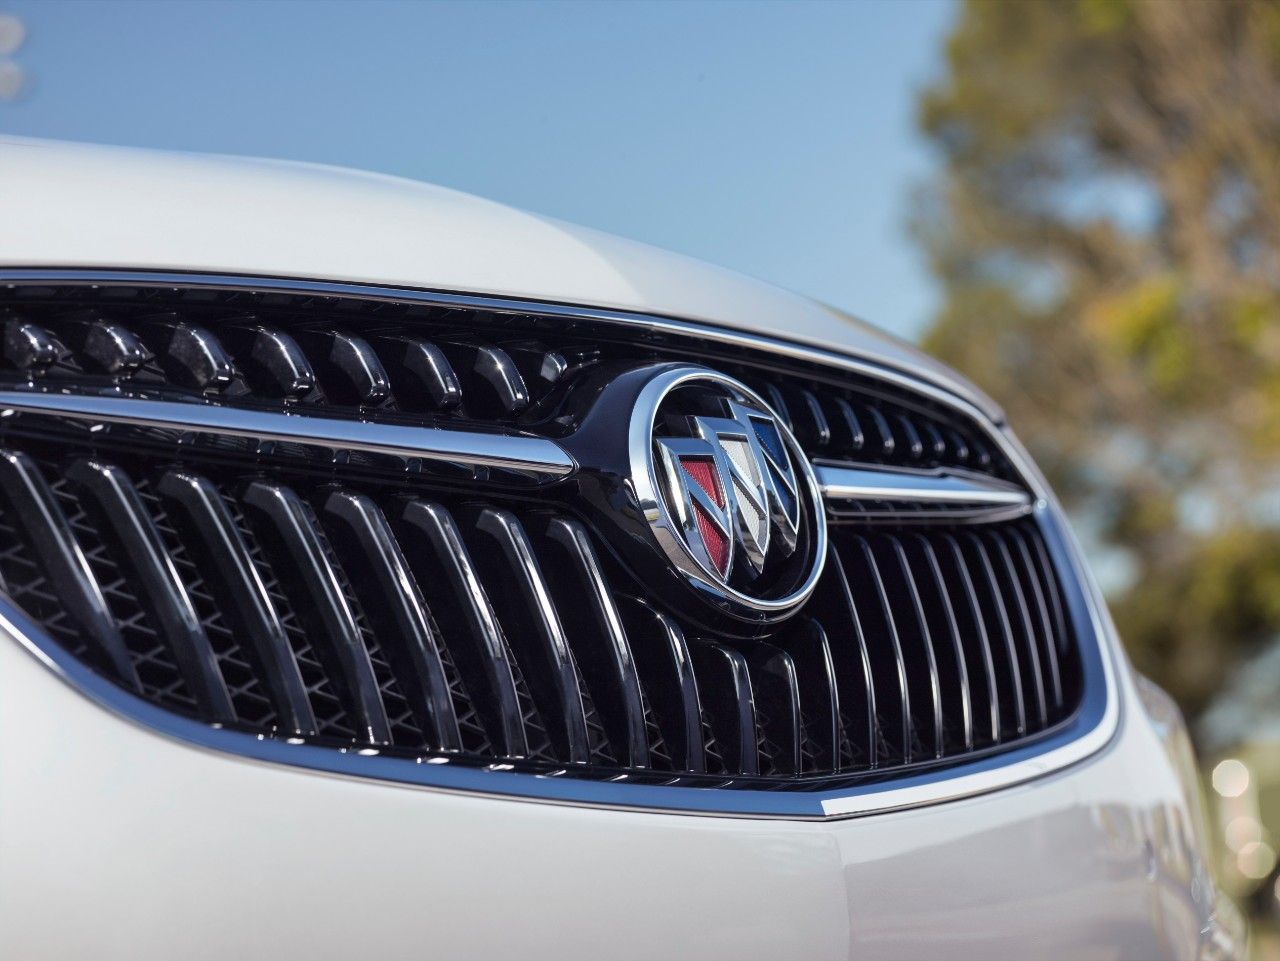 Buick Officially Adopts New Tri-Shield Logo